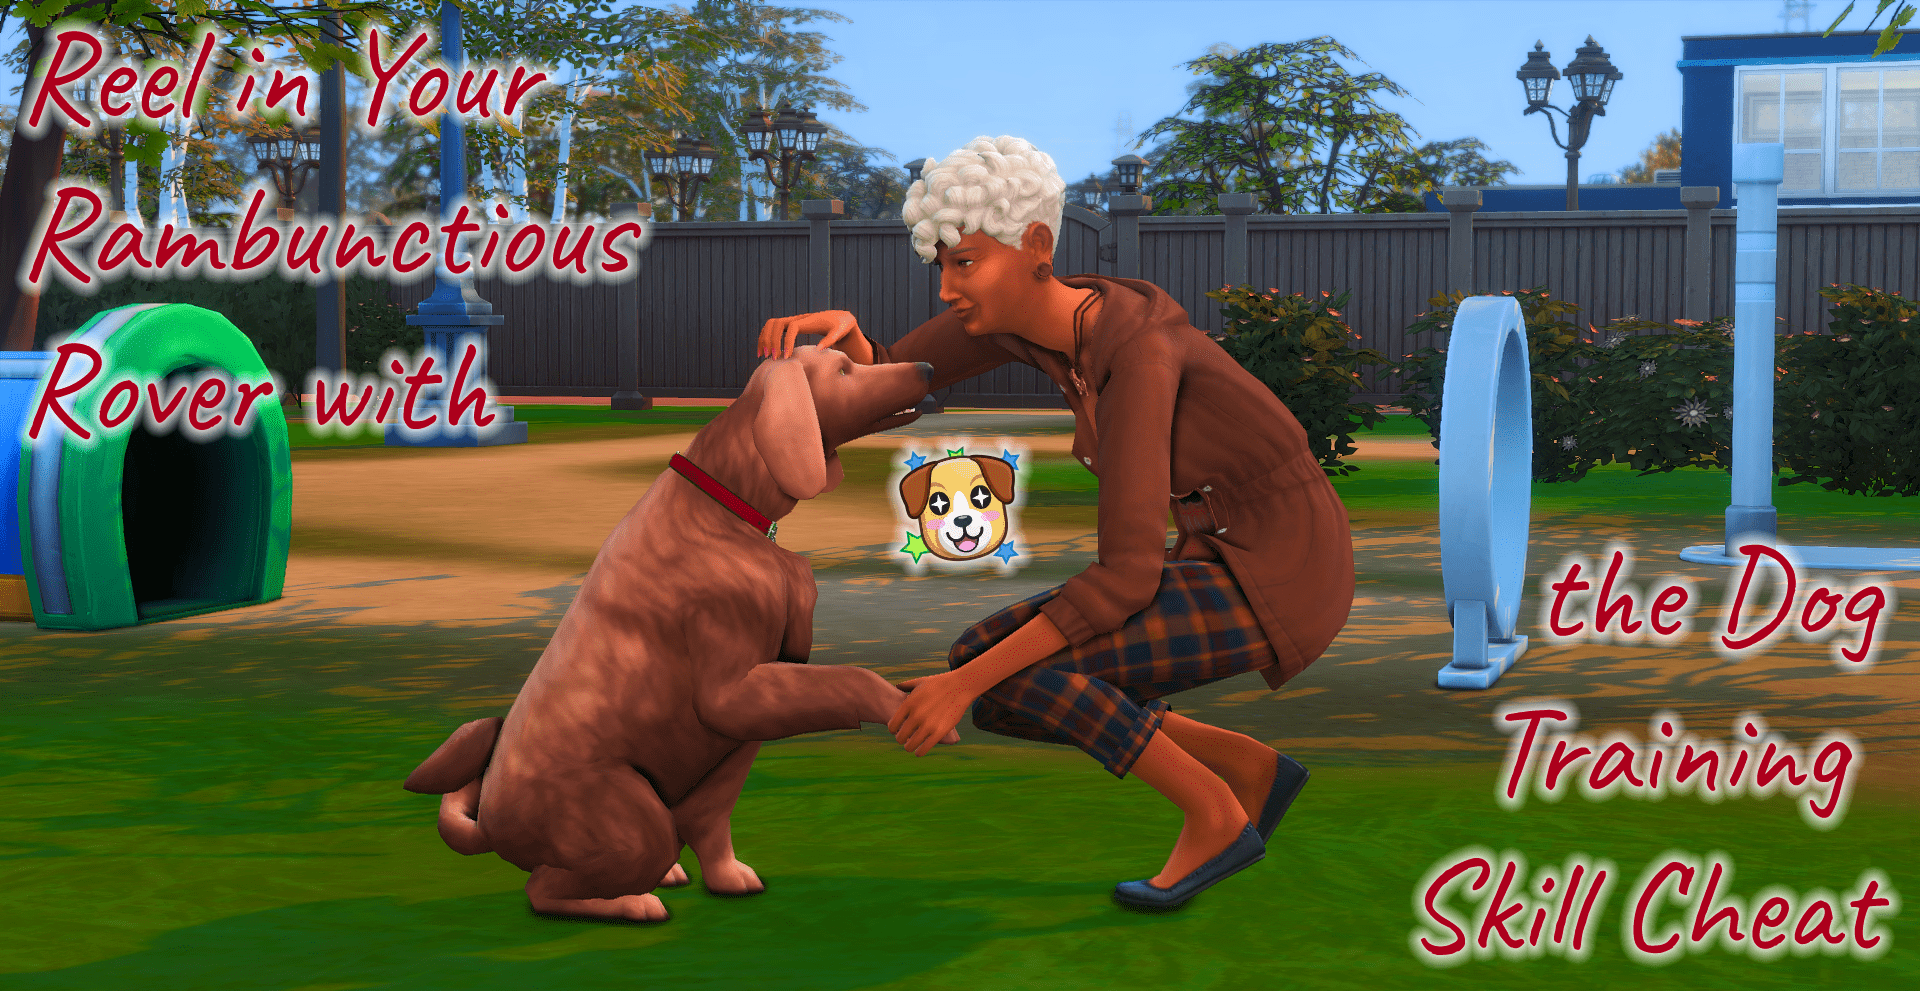 Sims 4: Cats And Dogs Cheats Guide: Vet Career, Pet Training Skill